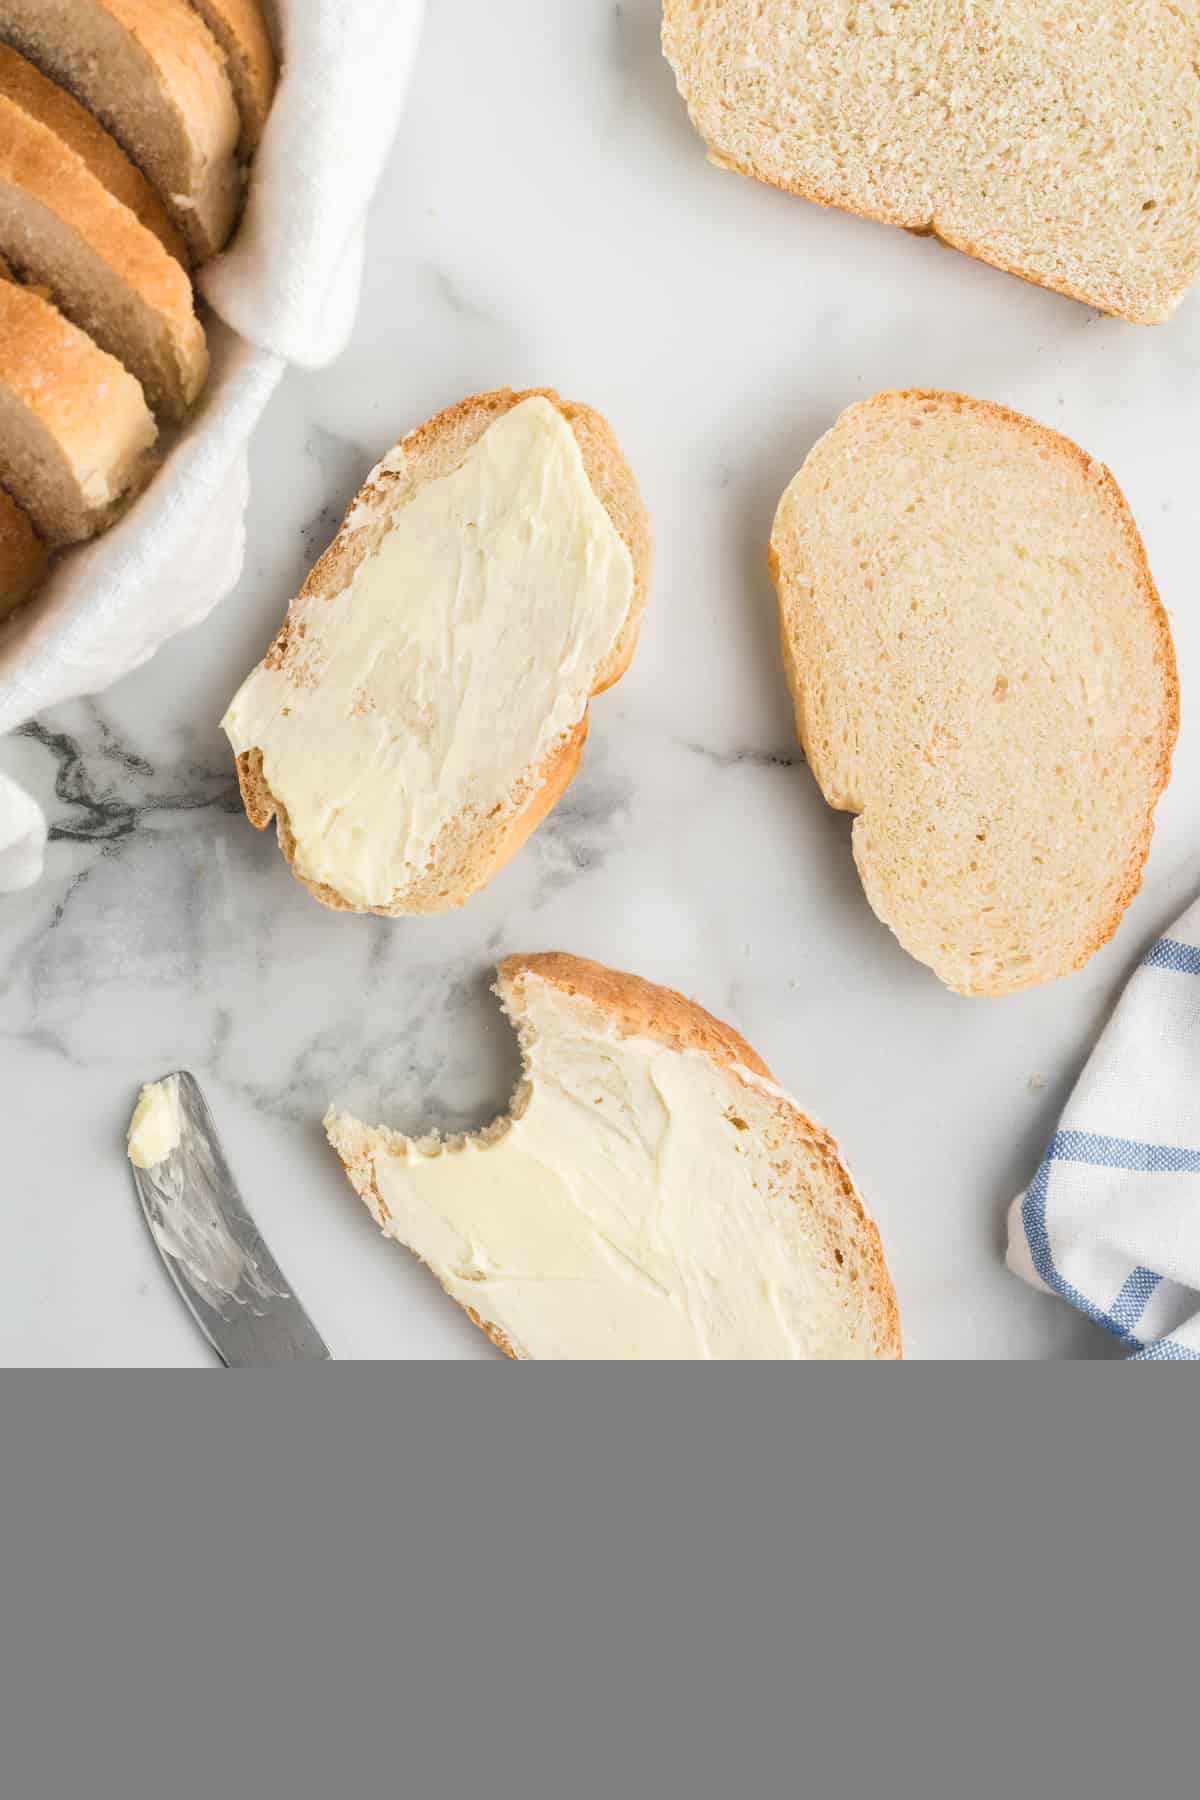 slices of the rustic italian bread loaf spread with softened butter.